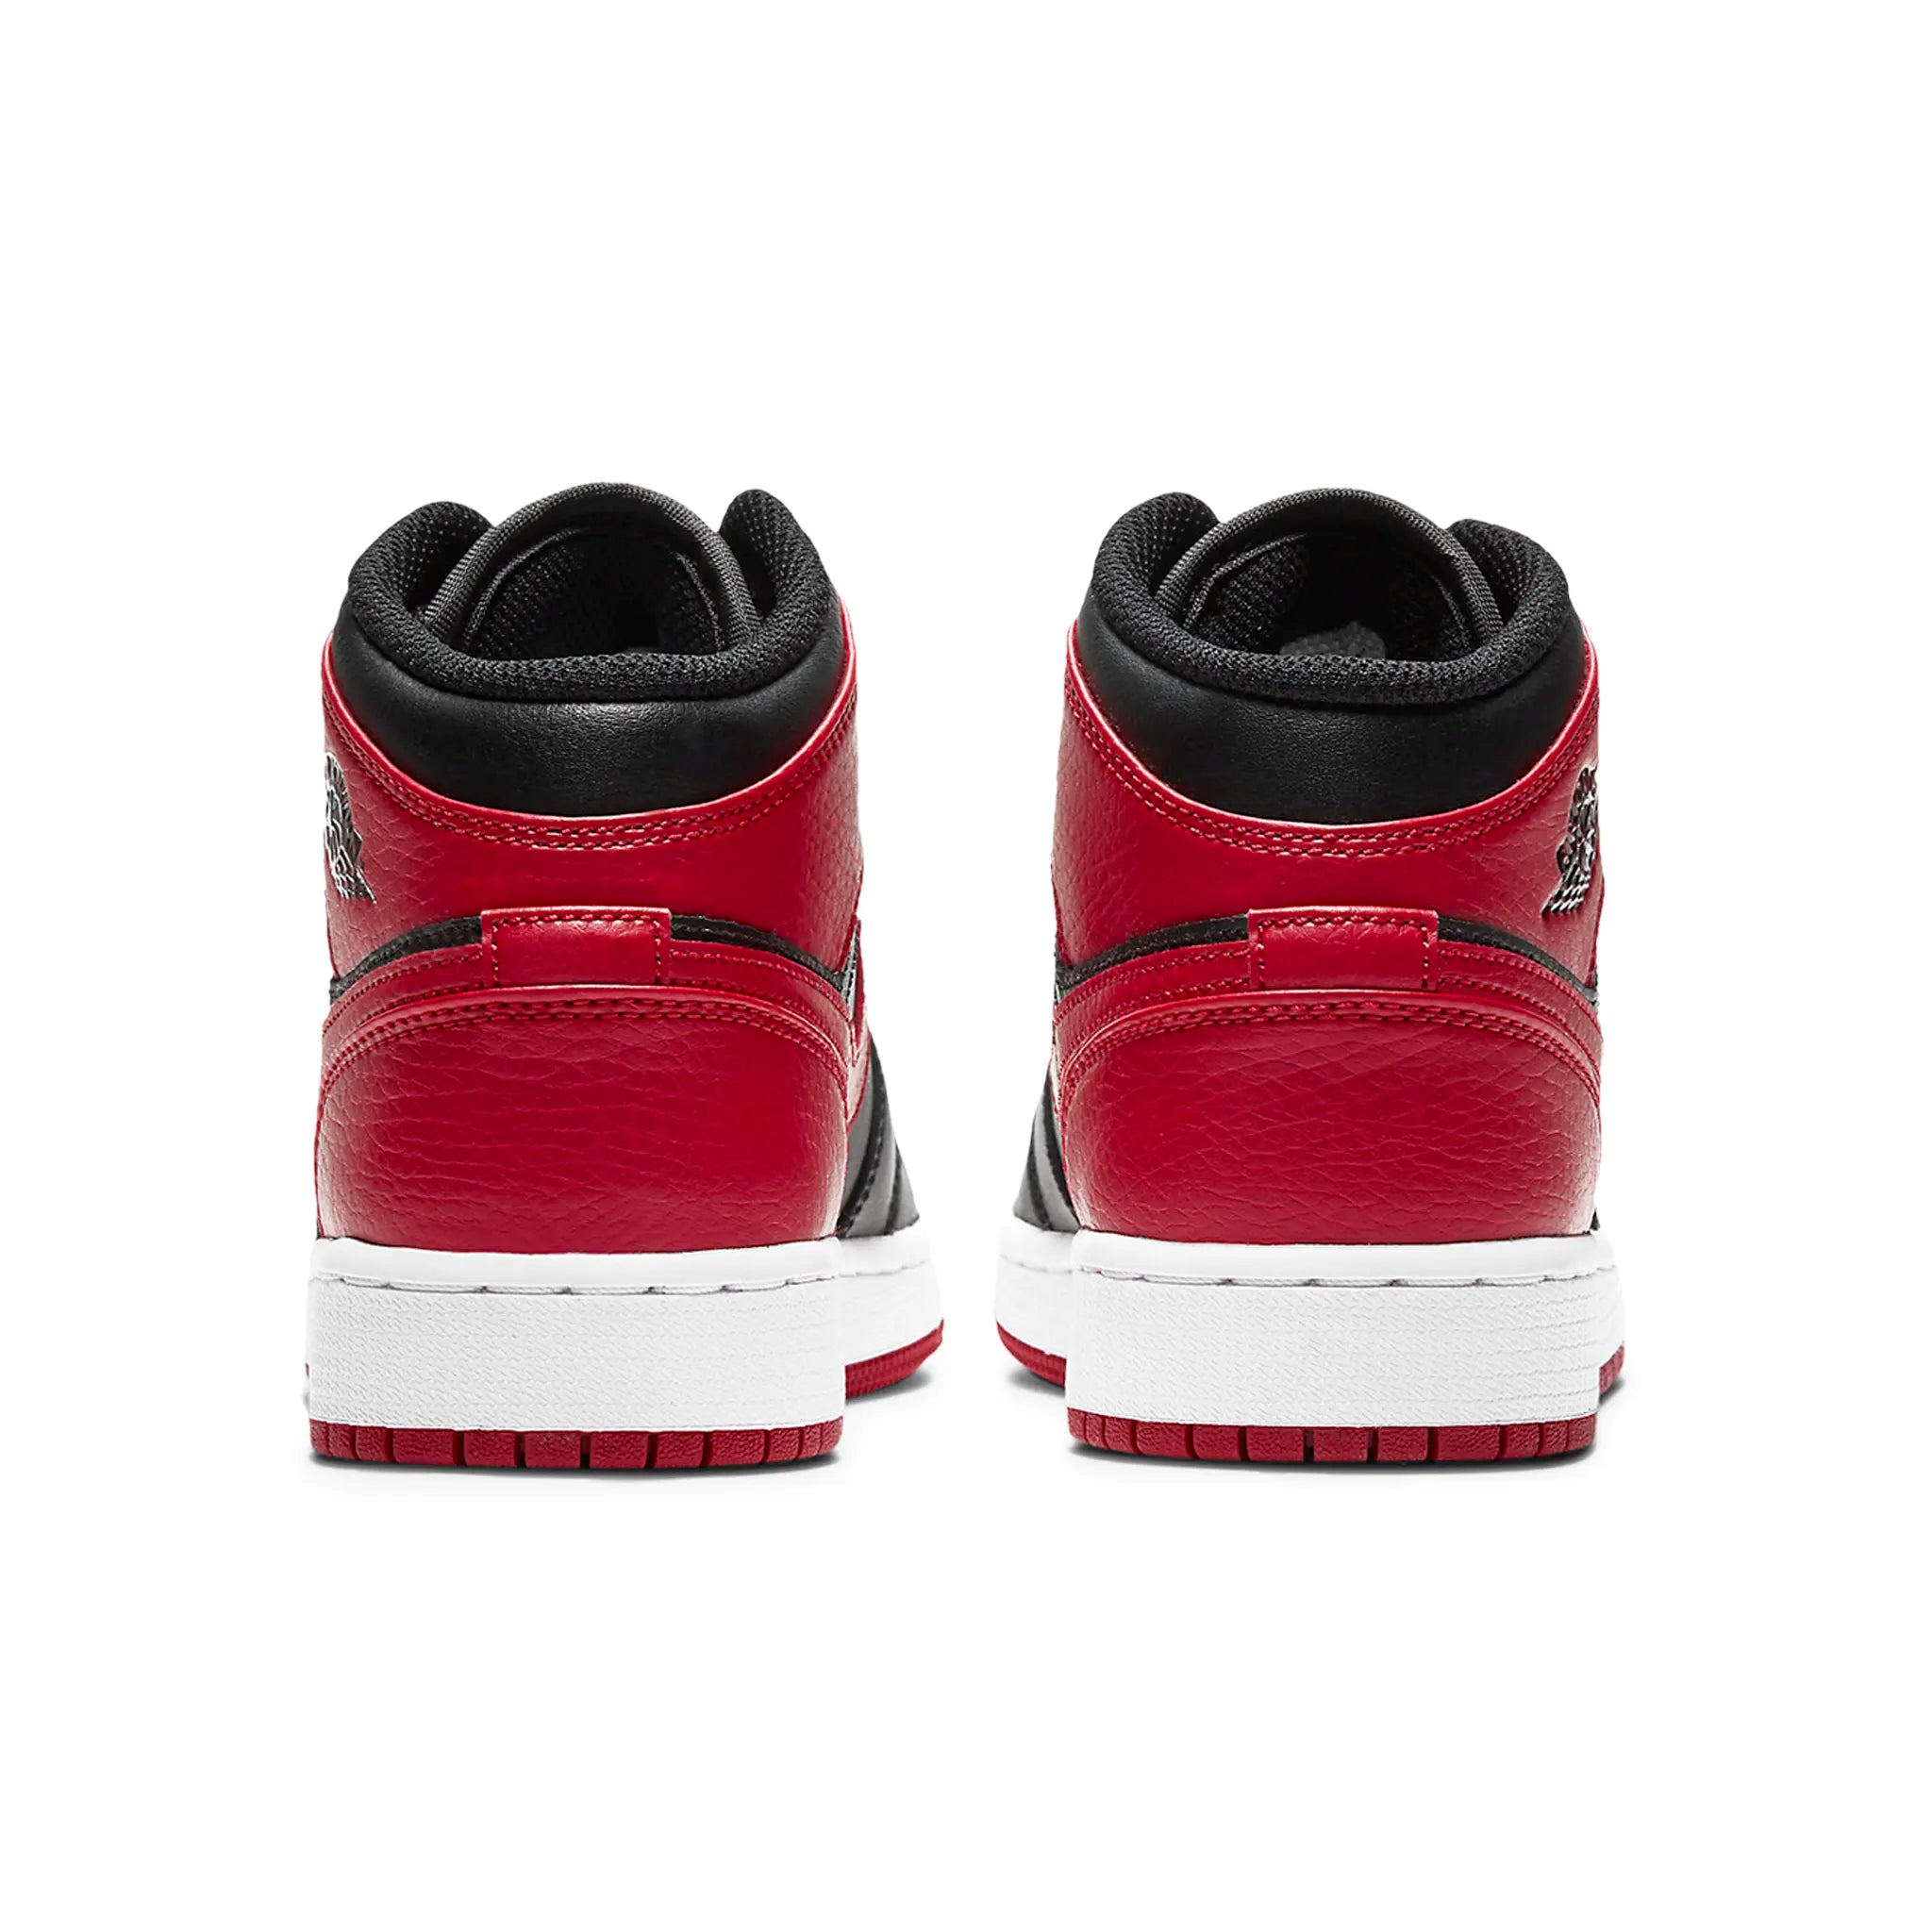 Back view of Air Jordan 1 Mid Banned (GS) 554725-074